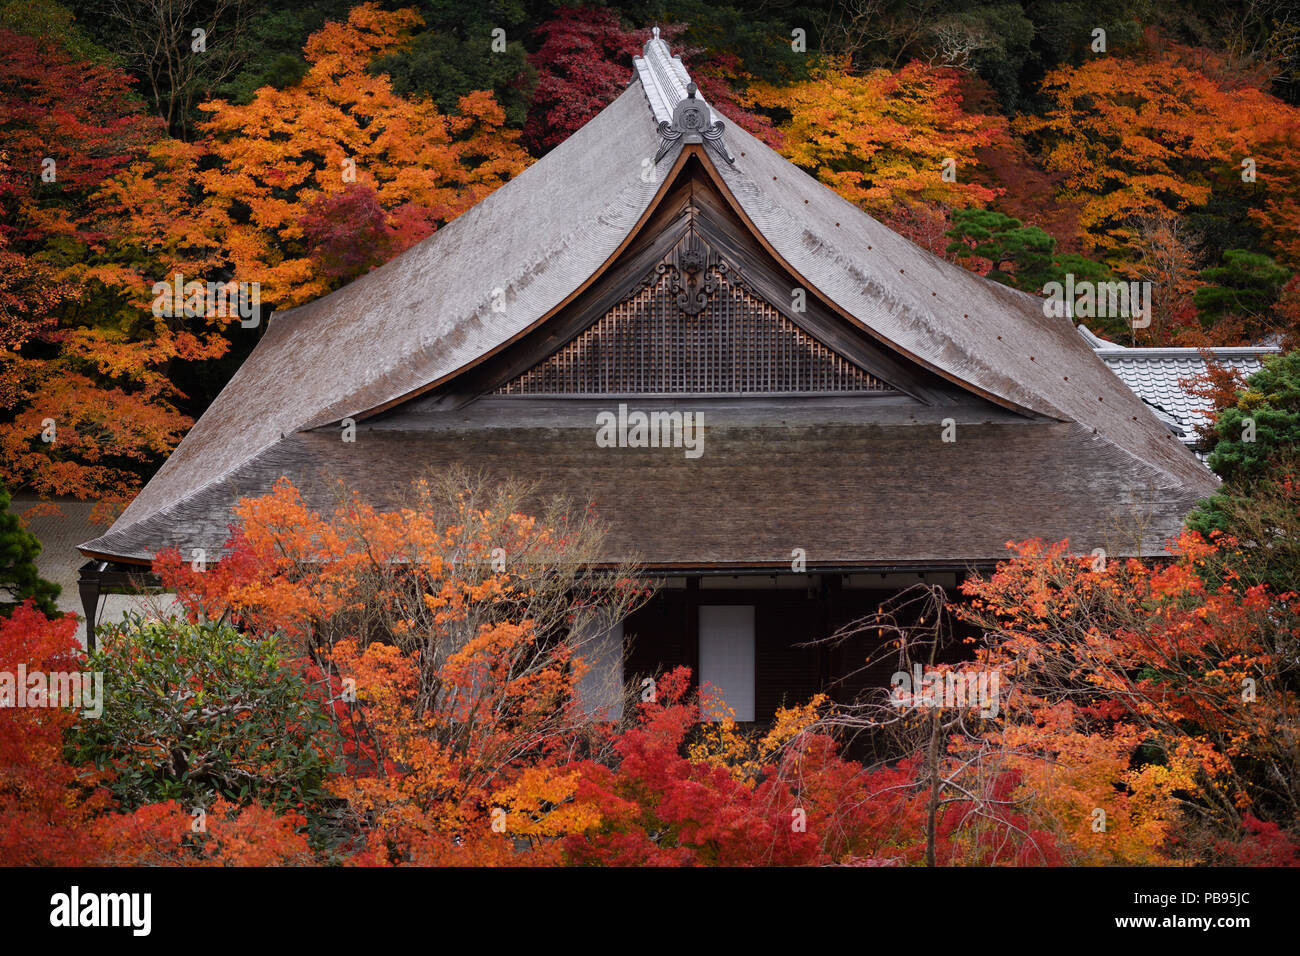 Roof with wooden shingles of a hall building at Nanzen-ji Buddhist temple complex in colorful autumn scenery, traditional Japanese architecture detail Stock Photo